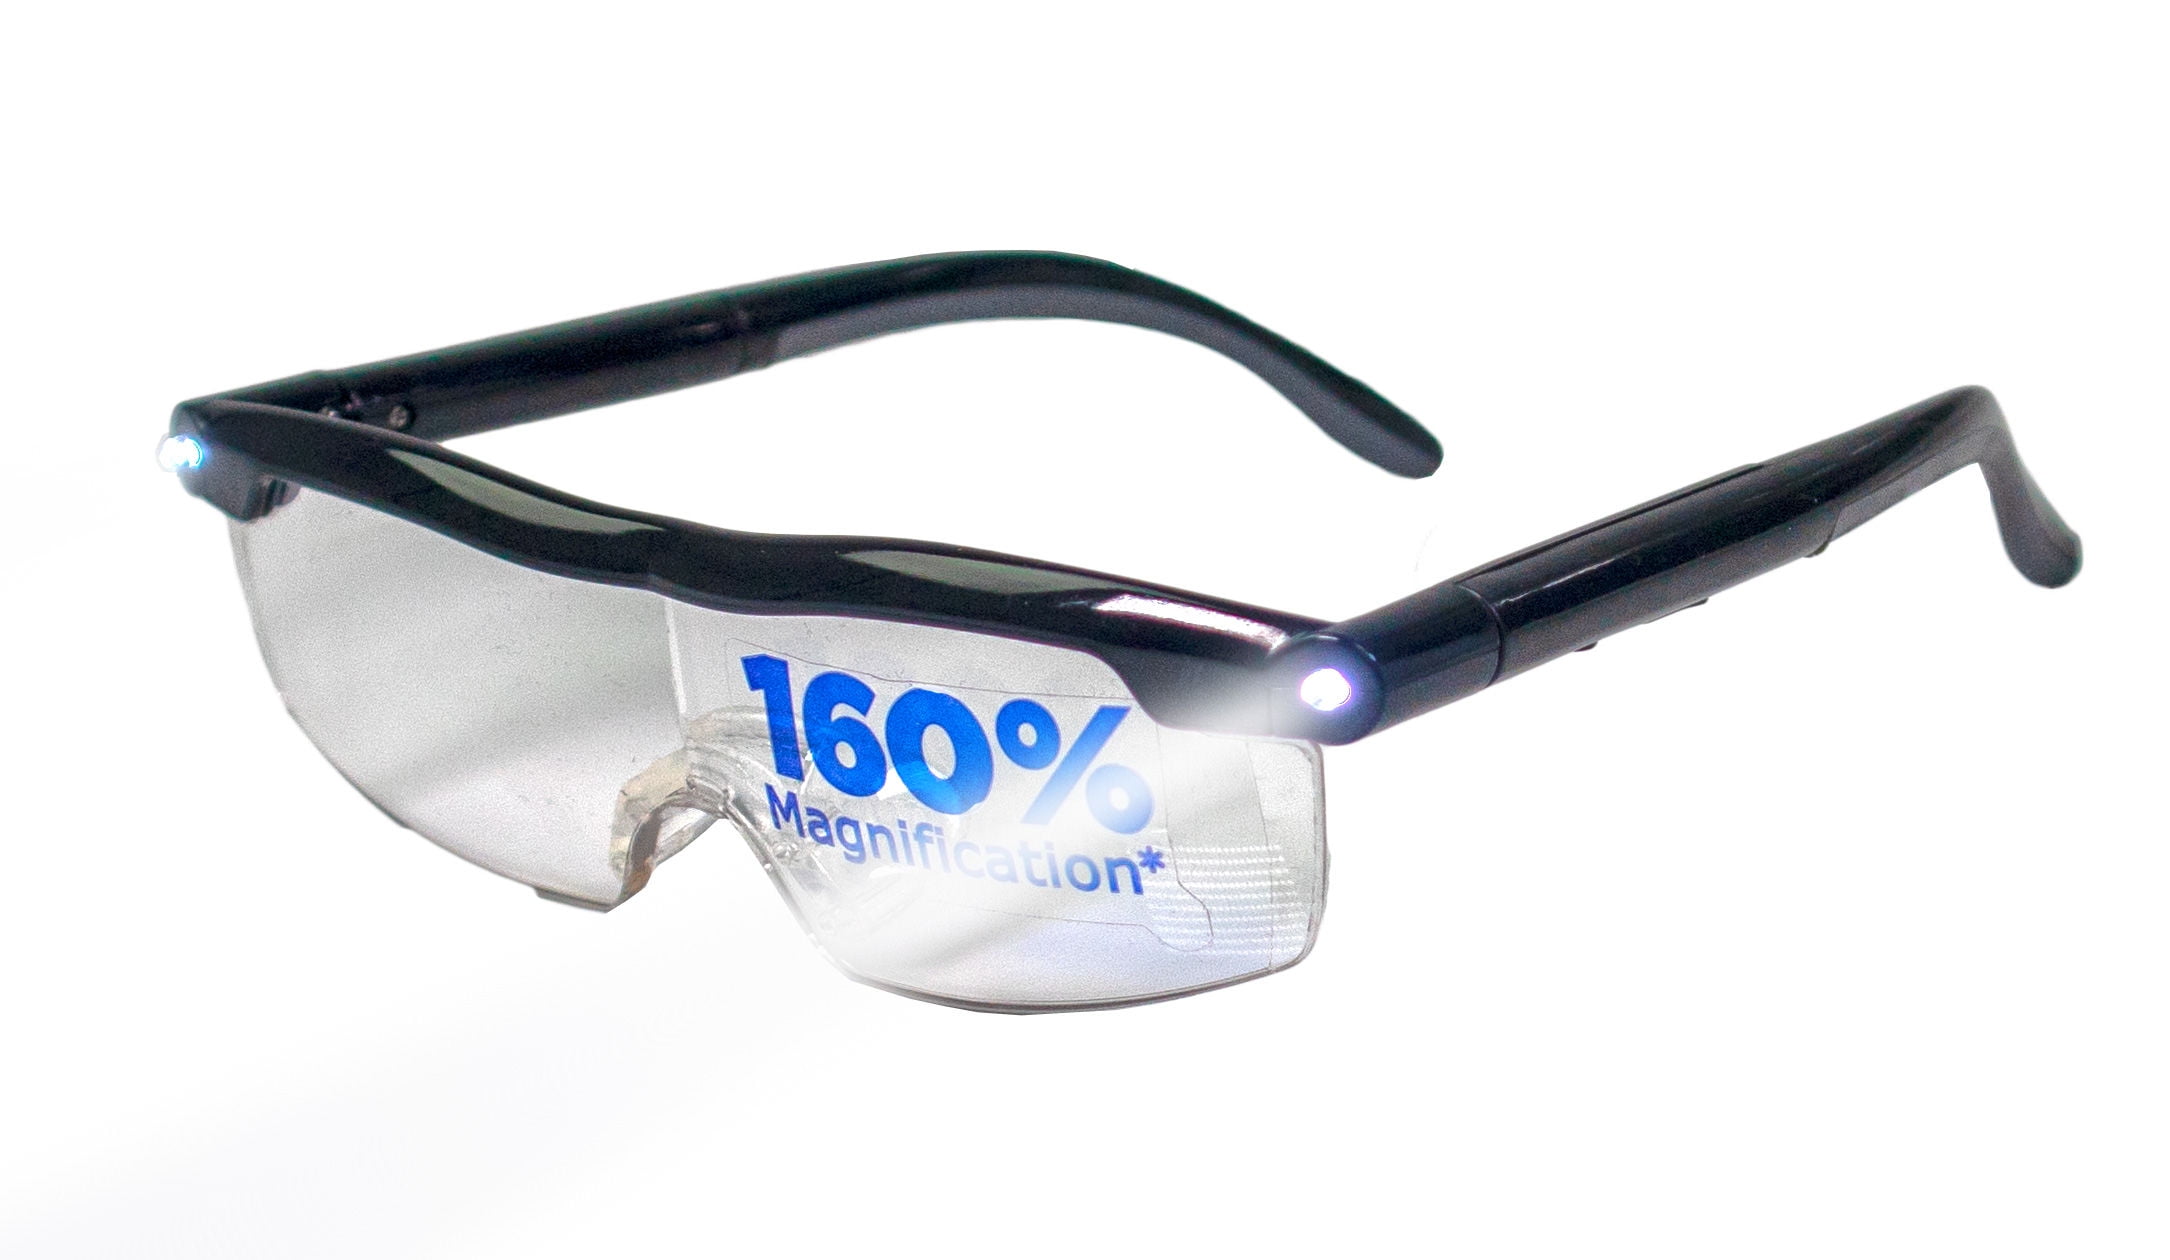 2023 NEW MIGHTY SIGHT LED Magnifying EYEWEAR Battery Glasses Magnifier 160%  US